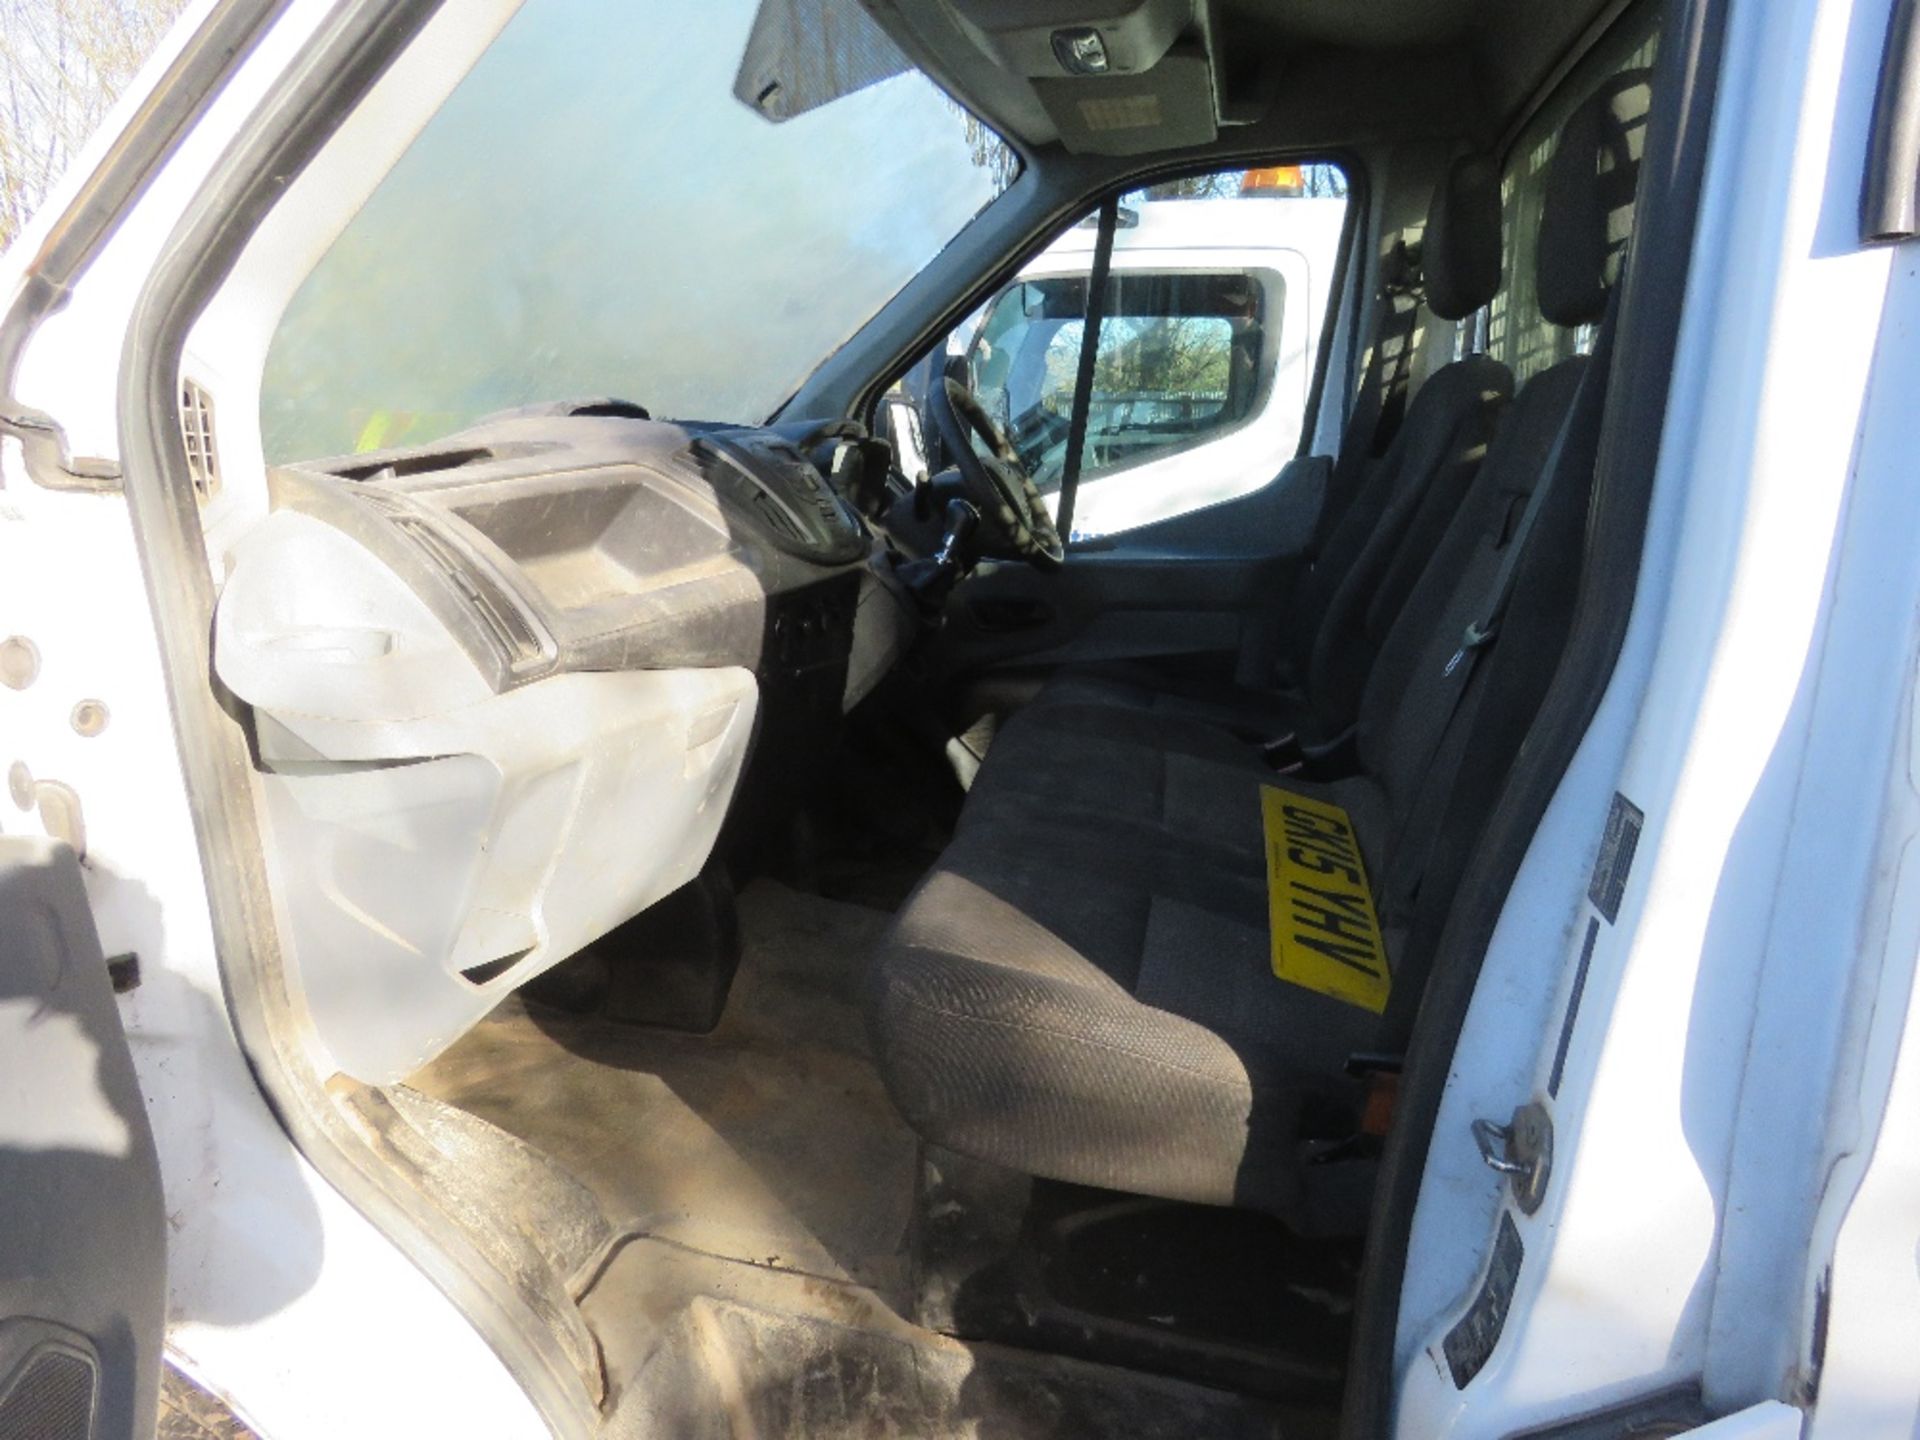 FORD TRANSIT 350 TWIN WHEEL 3.5TONNE DROP SIDE TRUCK WITH REAR TAIL LIFT REG:GK15 YHV. 216,966 REC M - Image 7 of 10